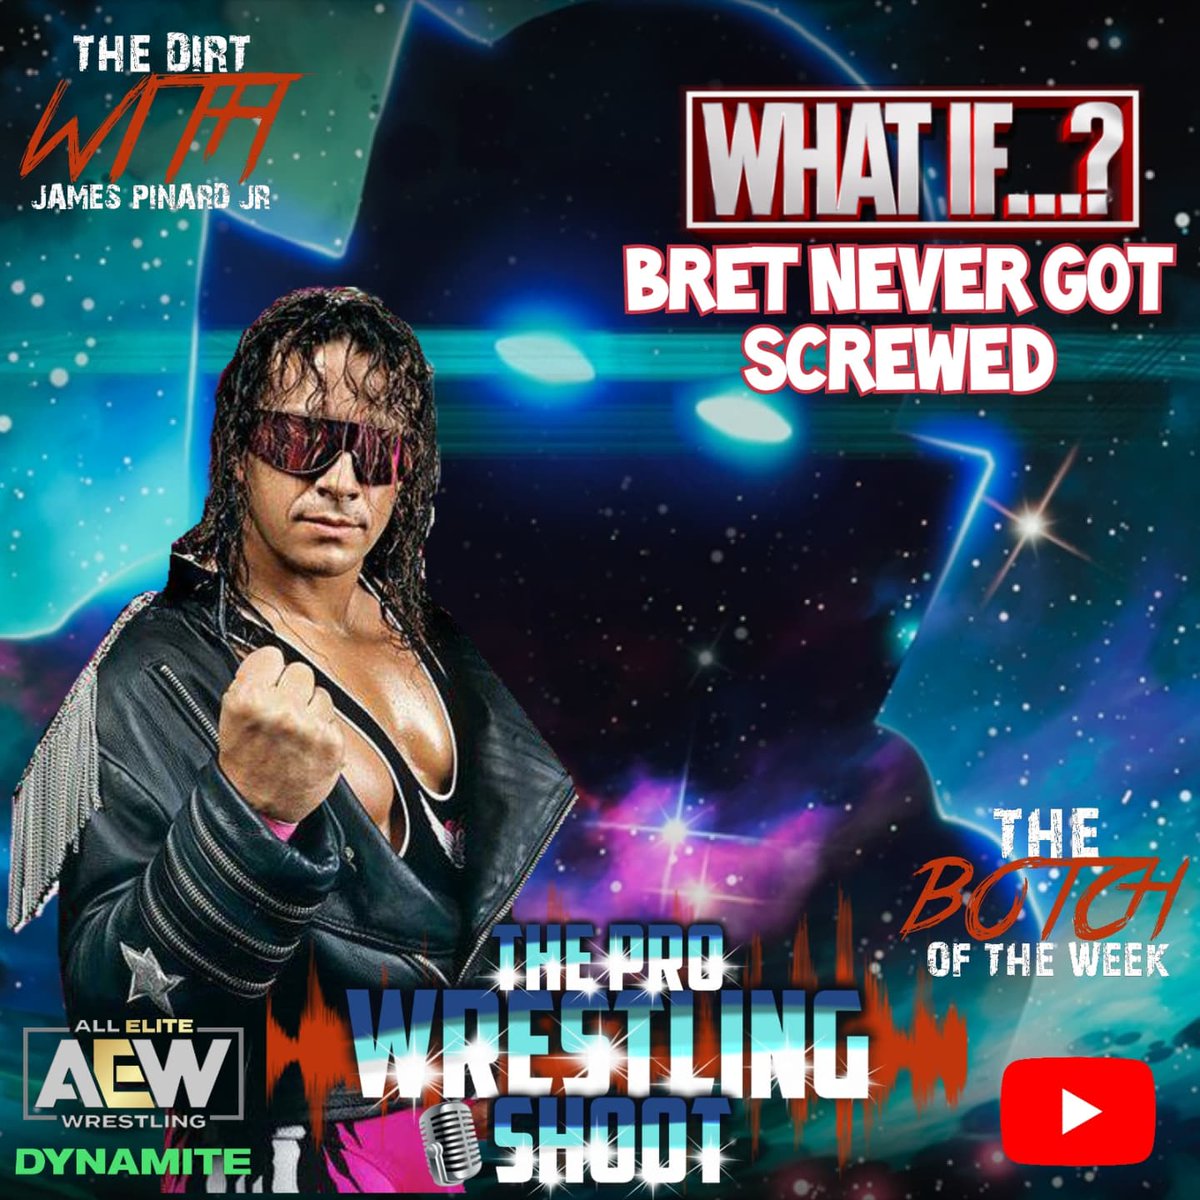 Available on all platforms! This episode we put a lot of love into. Click the link below to find it. 
drum.io/theprowrestlin… 

#onthegrind #qualityiskey #Quality #dothework #podcastHQ #WrestlingCommunity #BretHart #AEW #PNW #contentcreators #free #production #prowrestling #POD